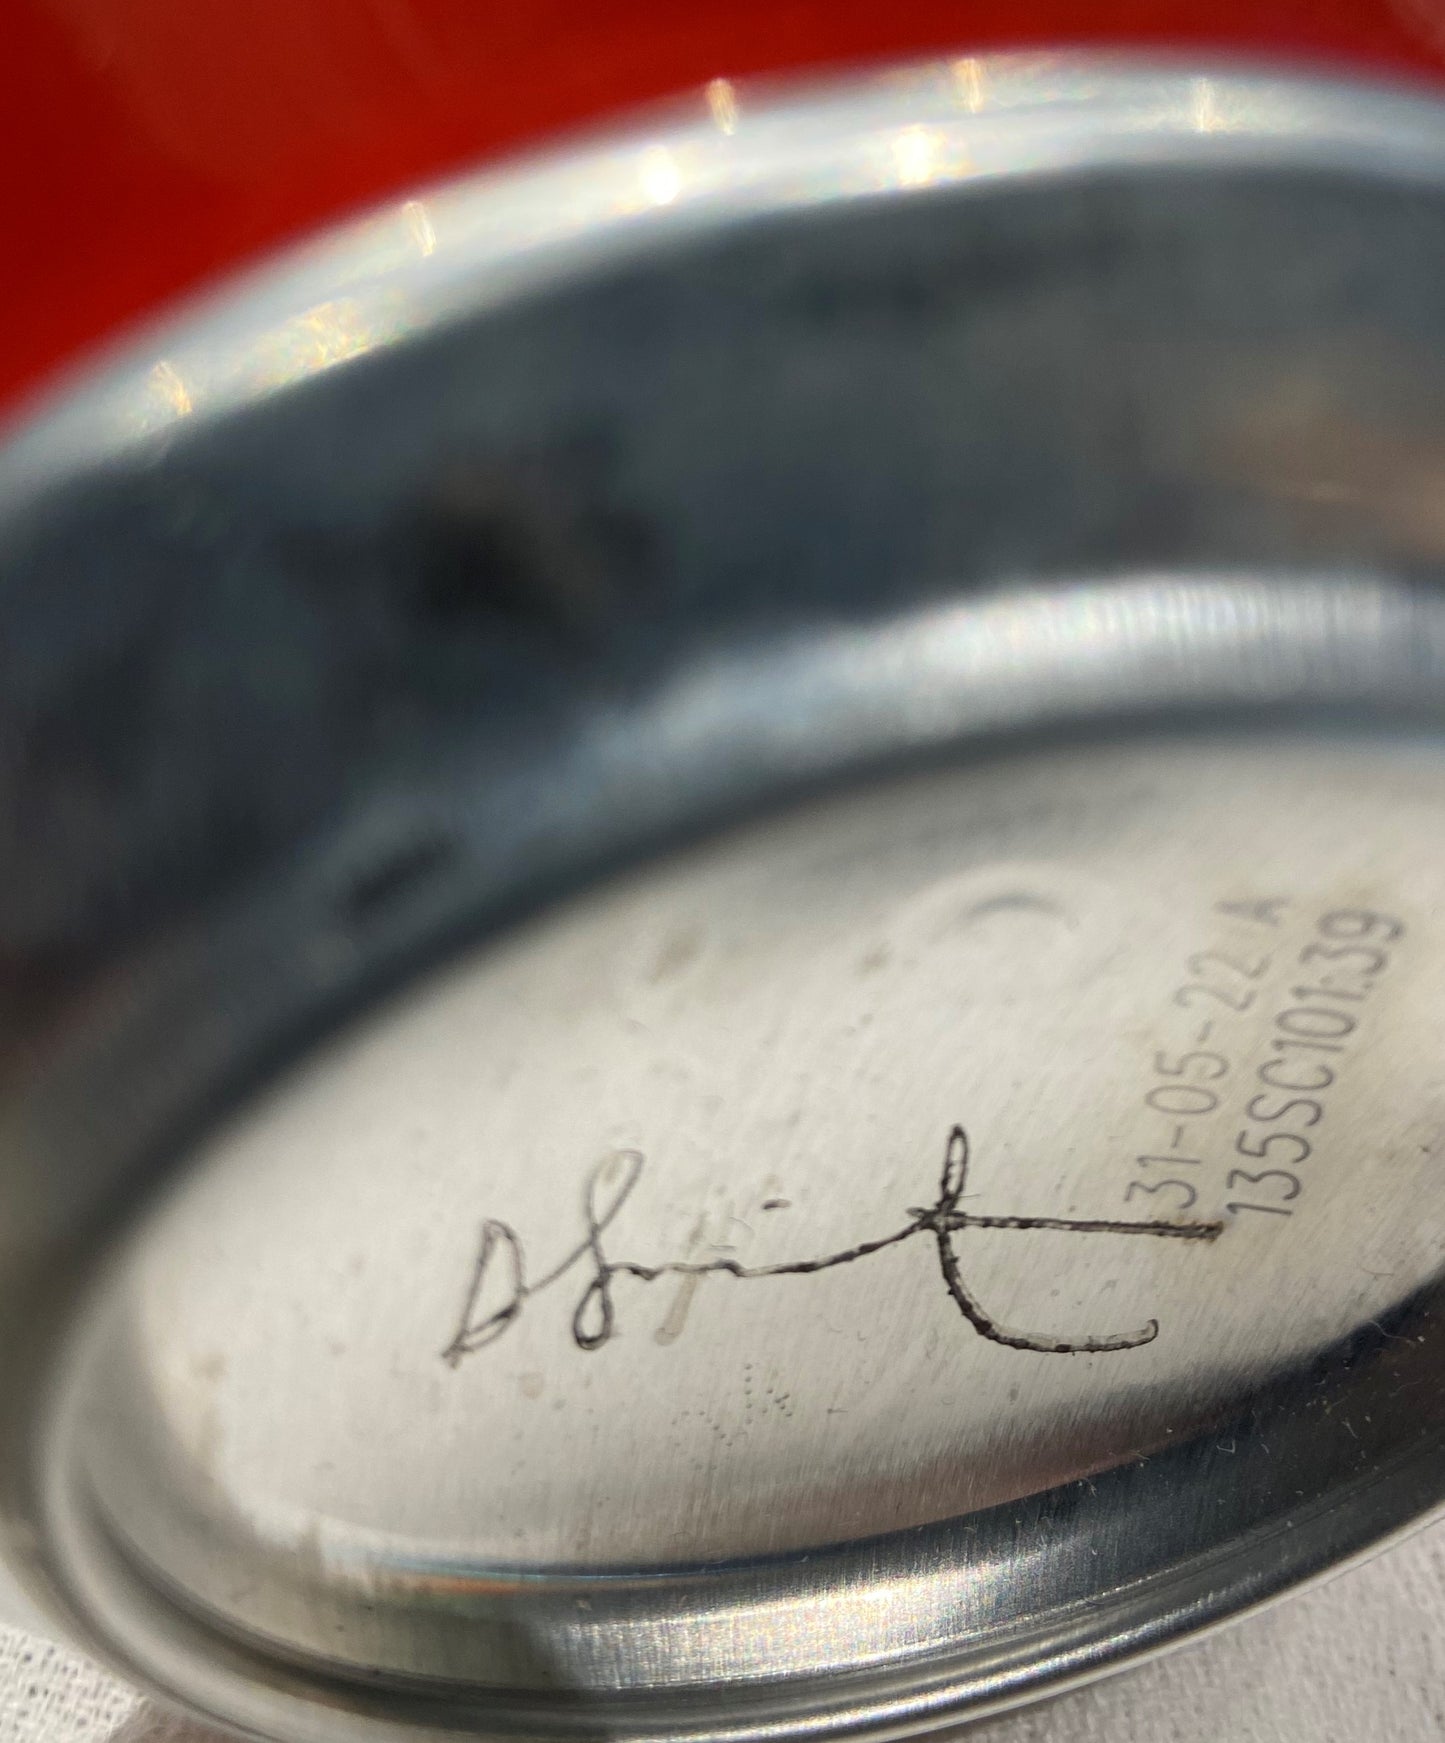 Damien Hirst signed Coca Cola can from the Gagosian Gallery